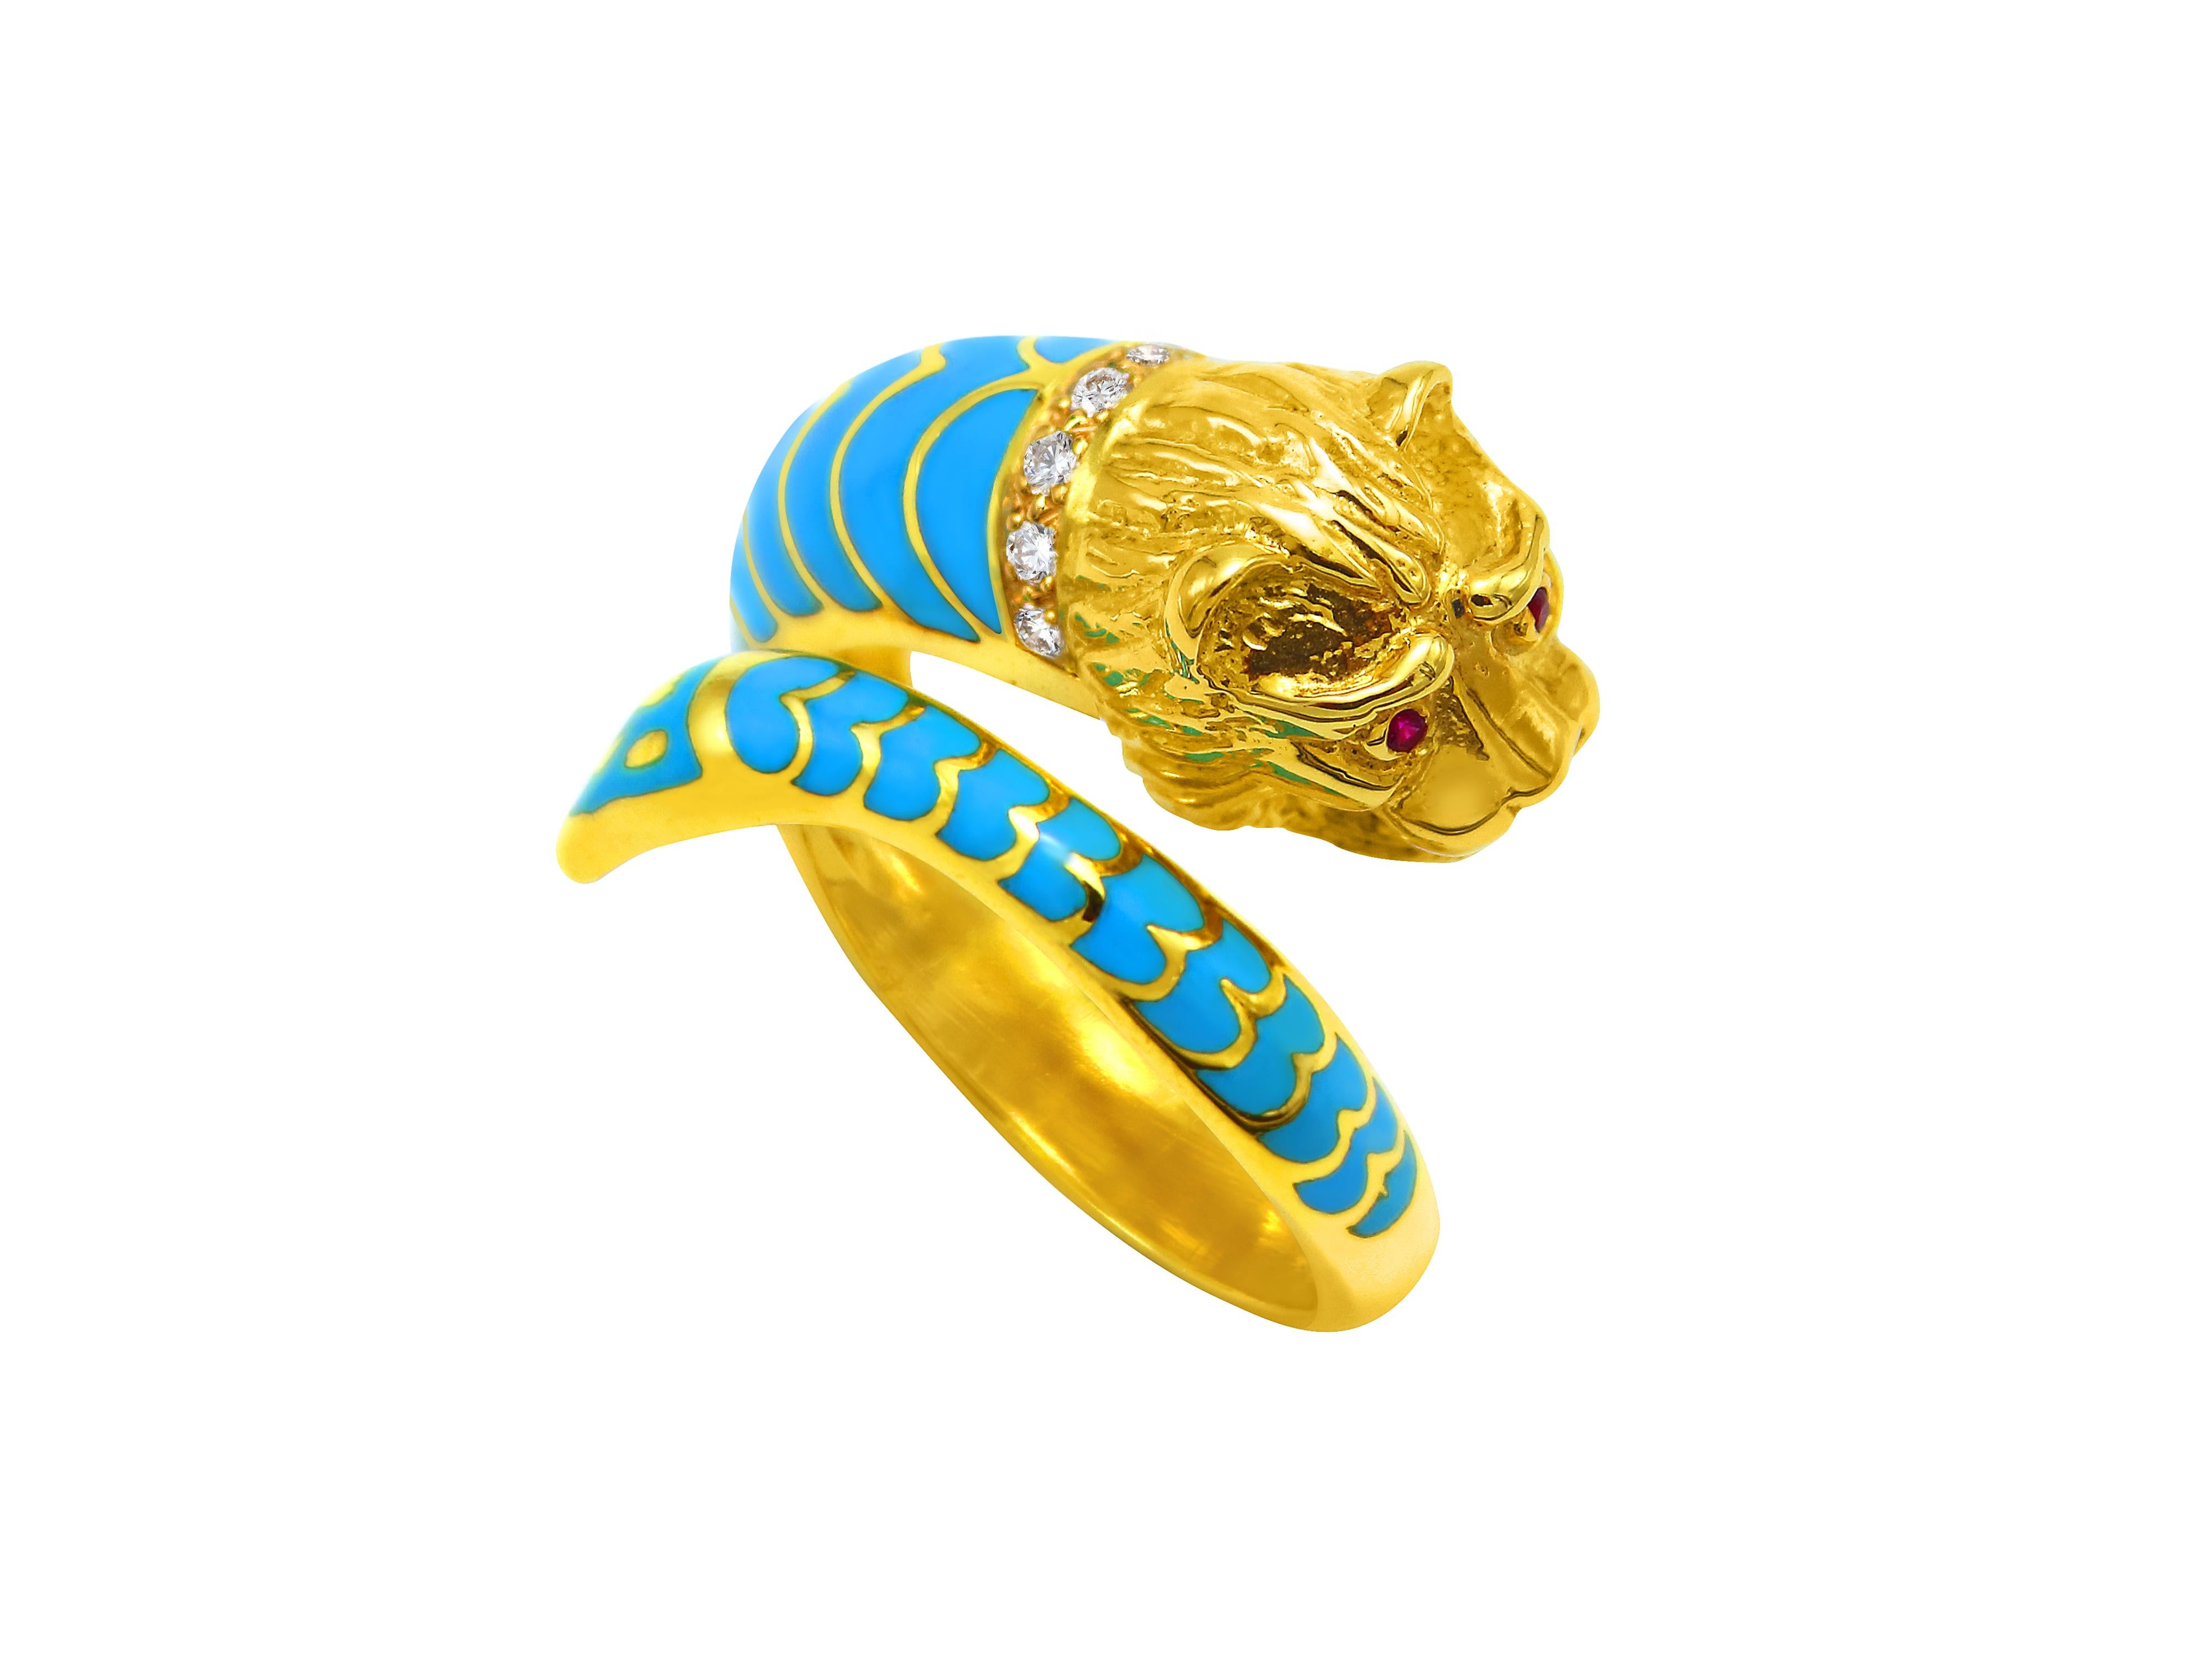 Lion ring museum inspiration in 18 karat yellow gold with an amazing 3-D design and fresh happy look of turquoise enamel. Natural 0.04 carats rubies in the eyes and a diamond collar of 0.10 carats.  Start adding some color to your jewelry box, it